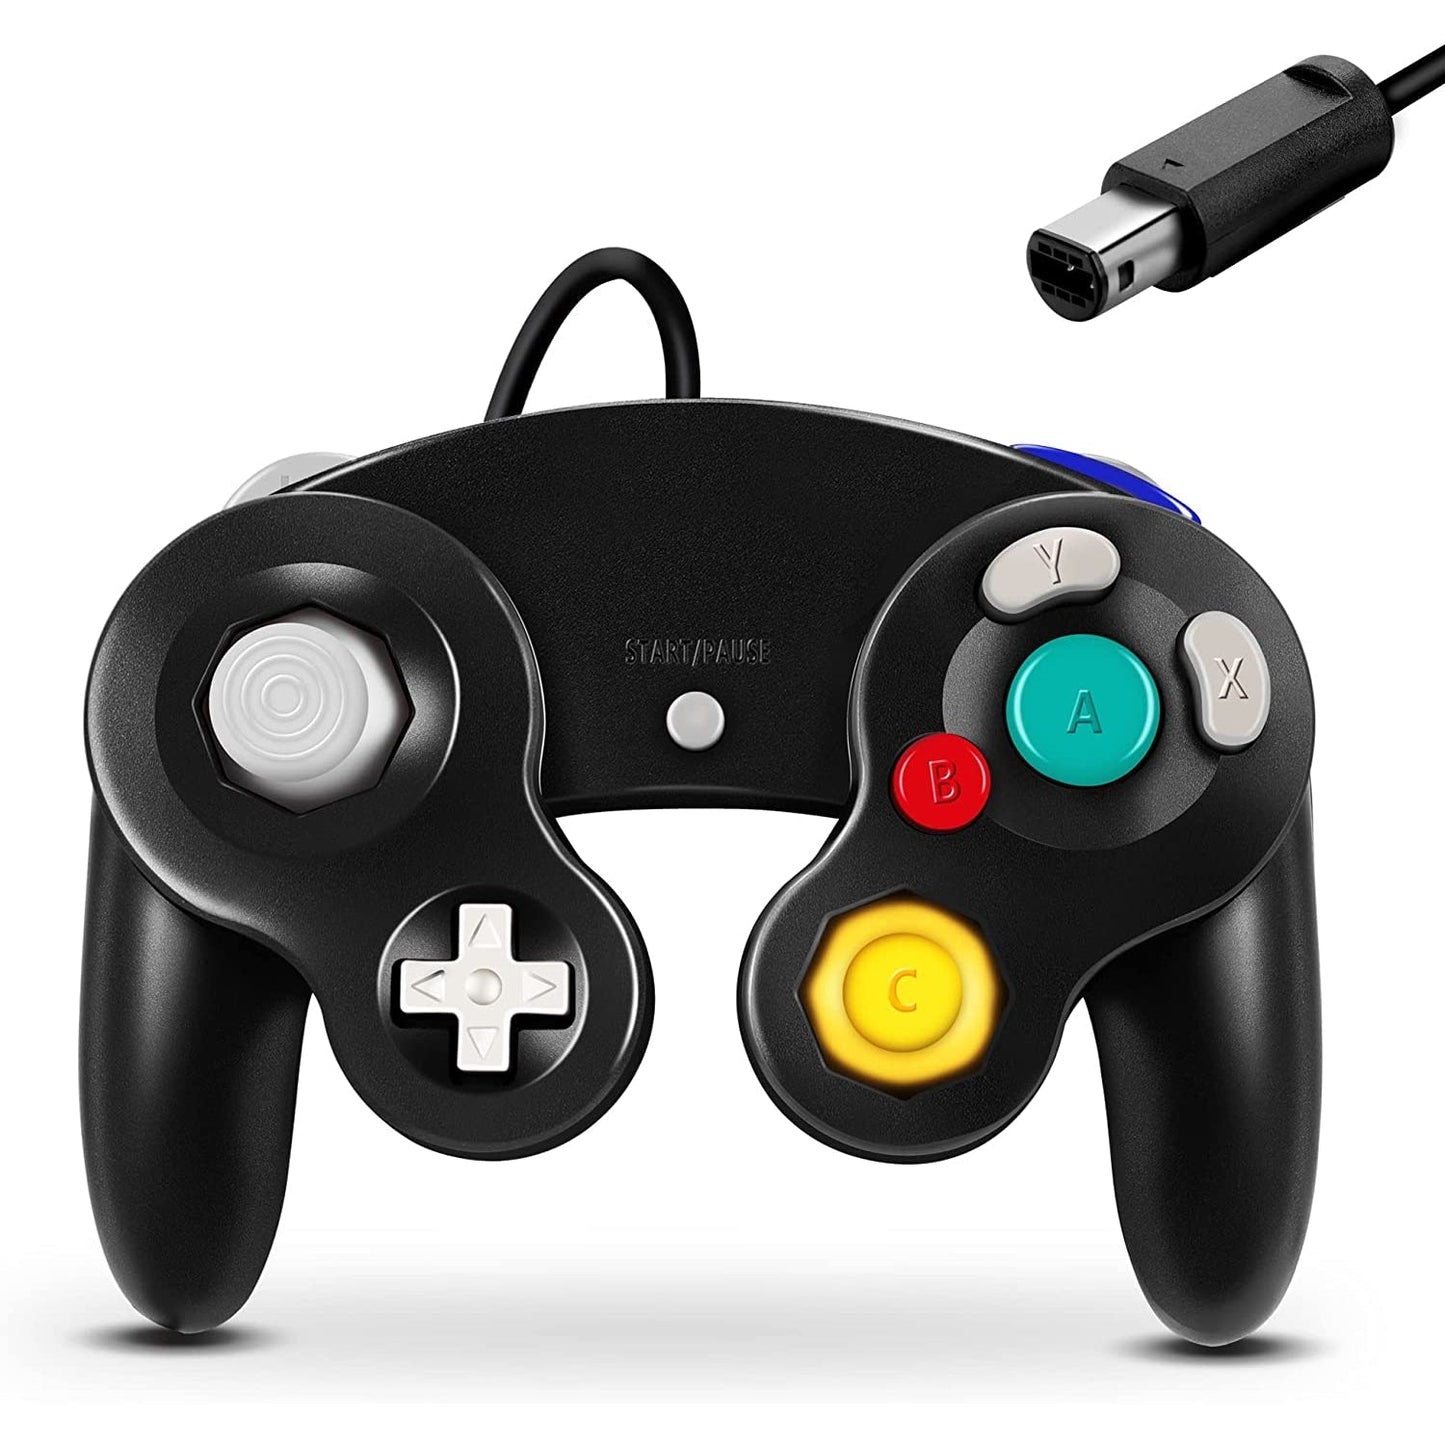 Gamecube Controller, Classic Controller Gamepad Compatible with Nintendo Wii, Upgraded from 2P Gaming